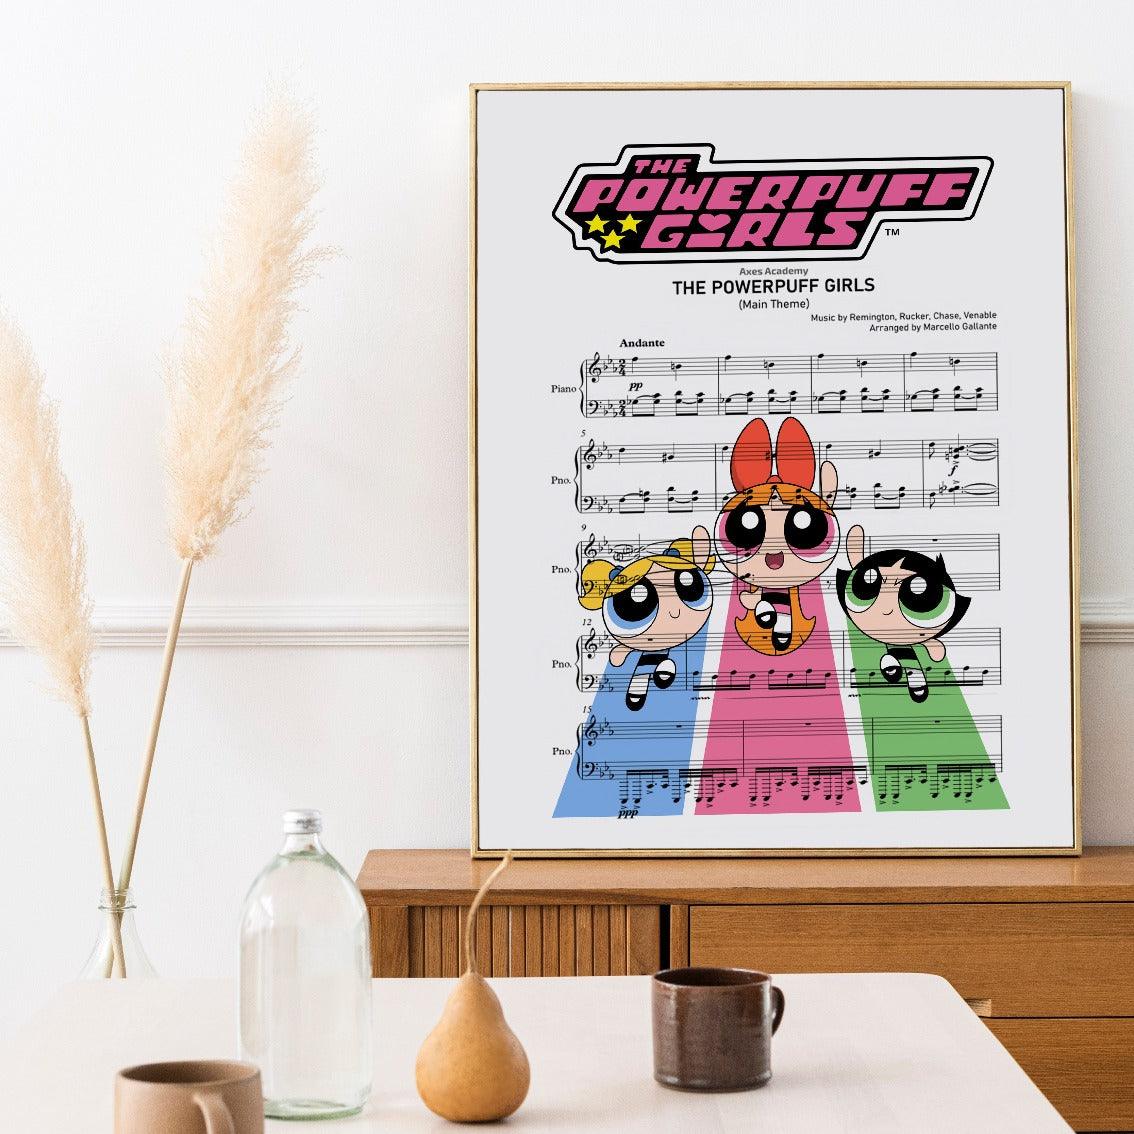 If you grew up in the '90s and early 2000s, then "The Powerpuff Girls" theme song probably brings back memories. Now you can own a piece of that nostalgia with this poster, which features the lyrics to the song hand-painted in beautiful calligraphy. Hang this poster in your home and be transported back to your childhood every time you hear the song.